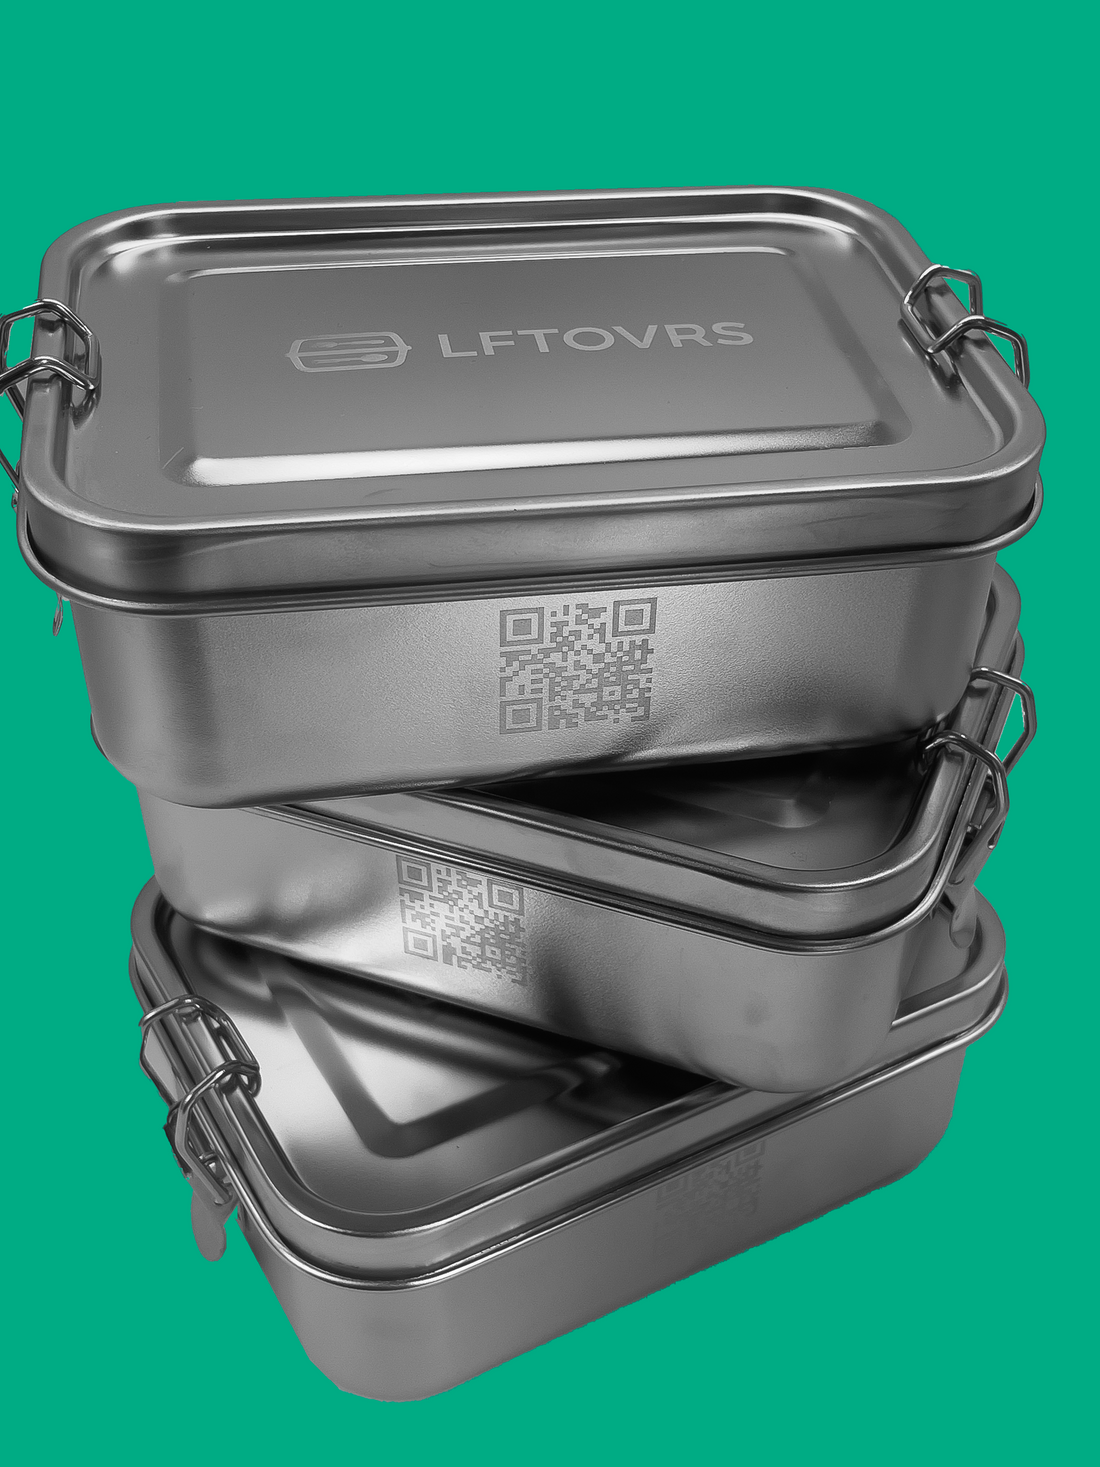 The lunchbox you didn’t know you needed - Become more sustainable